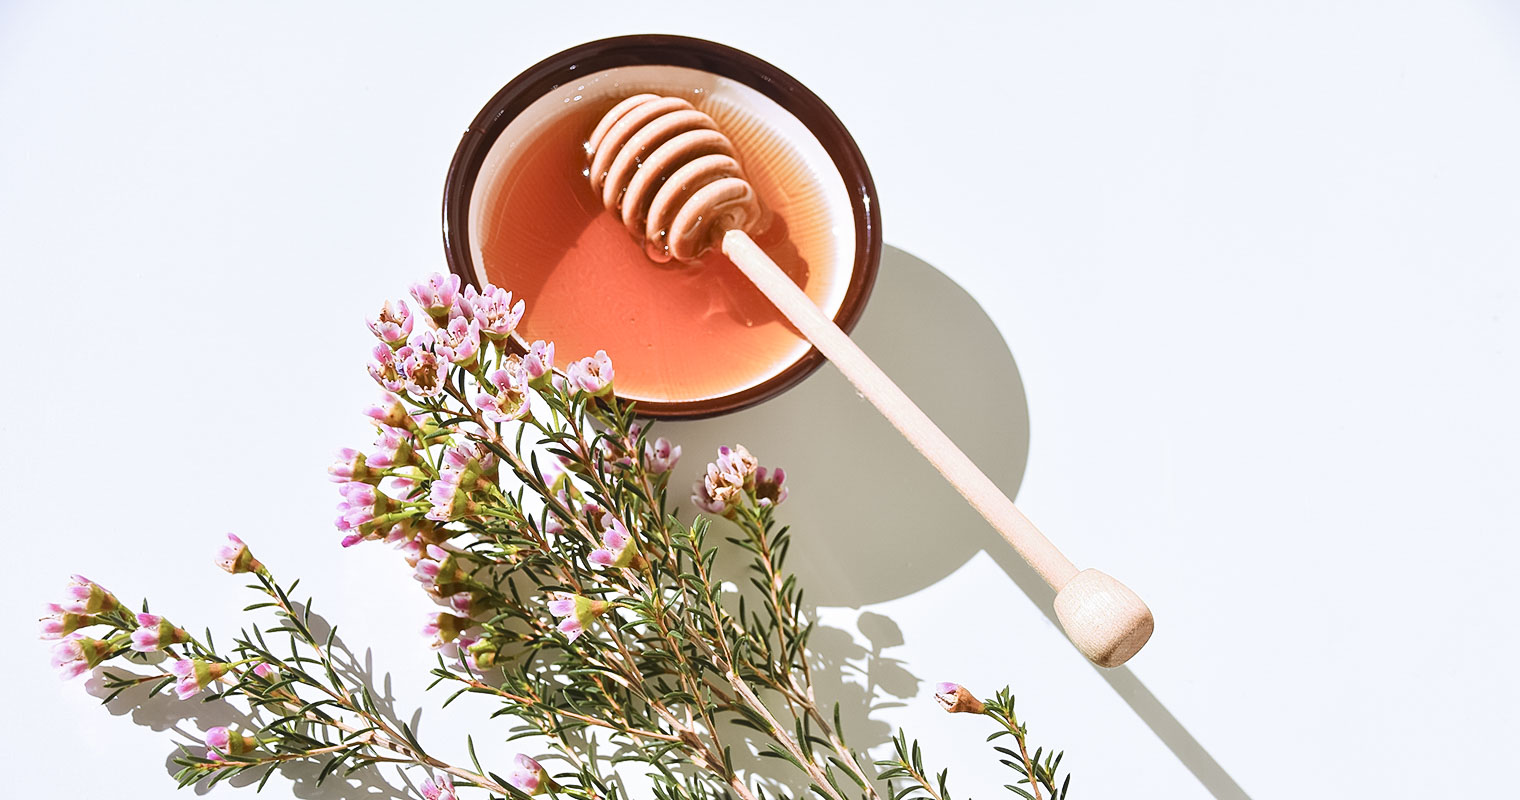 Pink manuka tree flower and manuka honey in a bowl, on a white background.